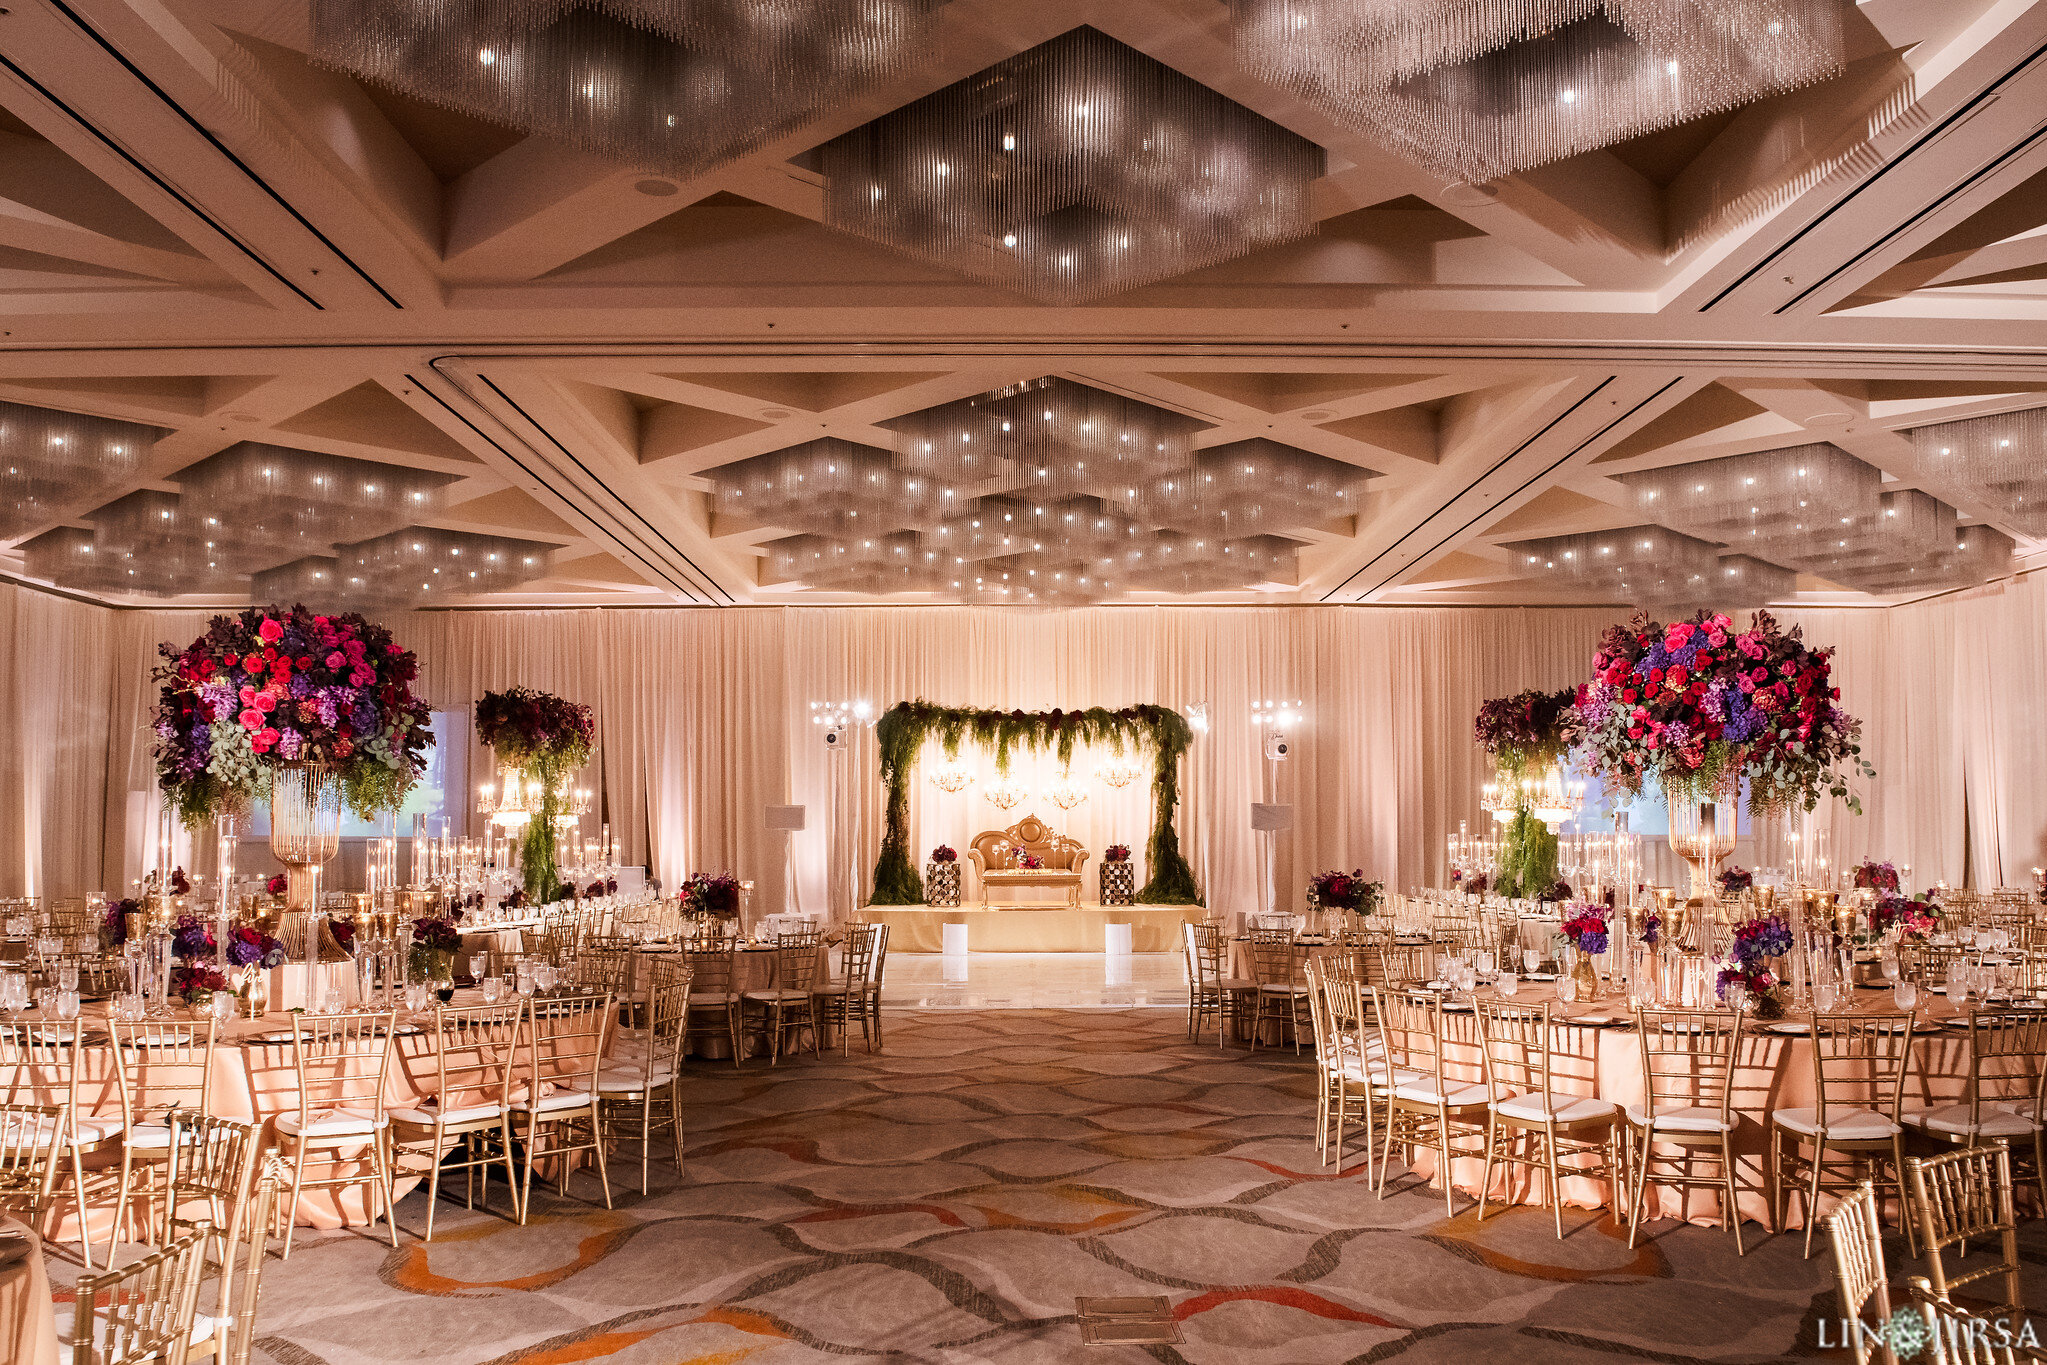 I-Hotel-Irvine-Indian-Wedding-Reception-Square-Root-Designs-Lin-and-Jirsa.jpg